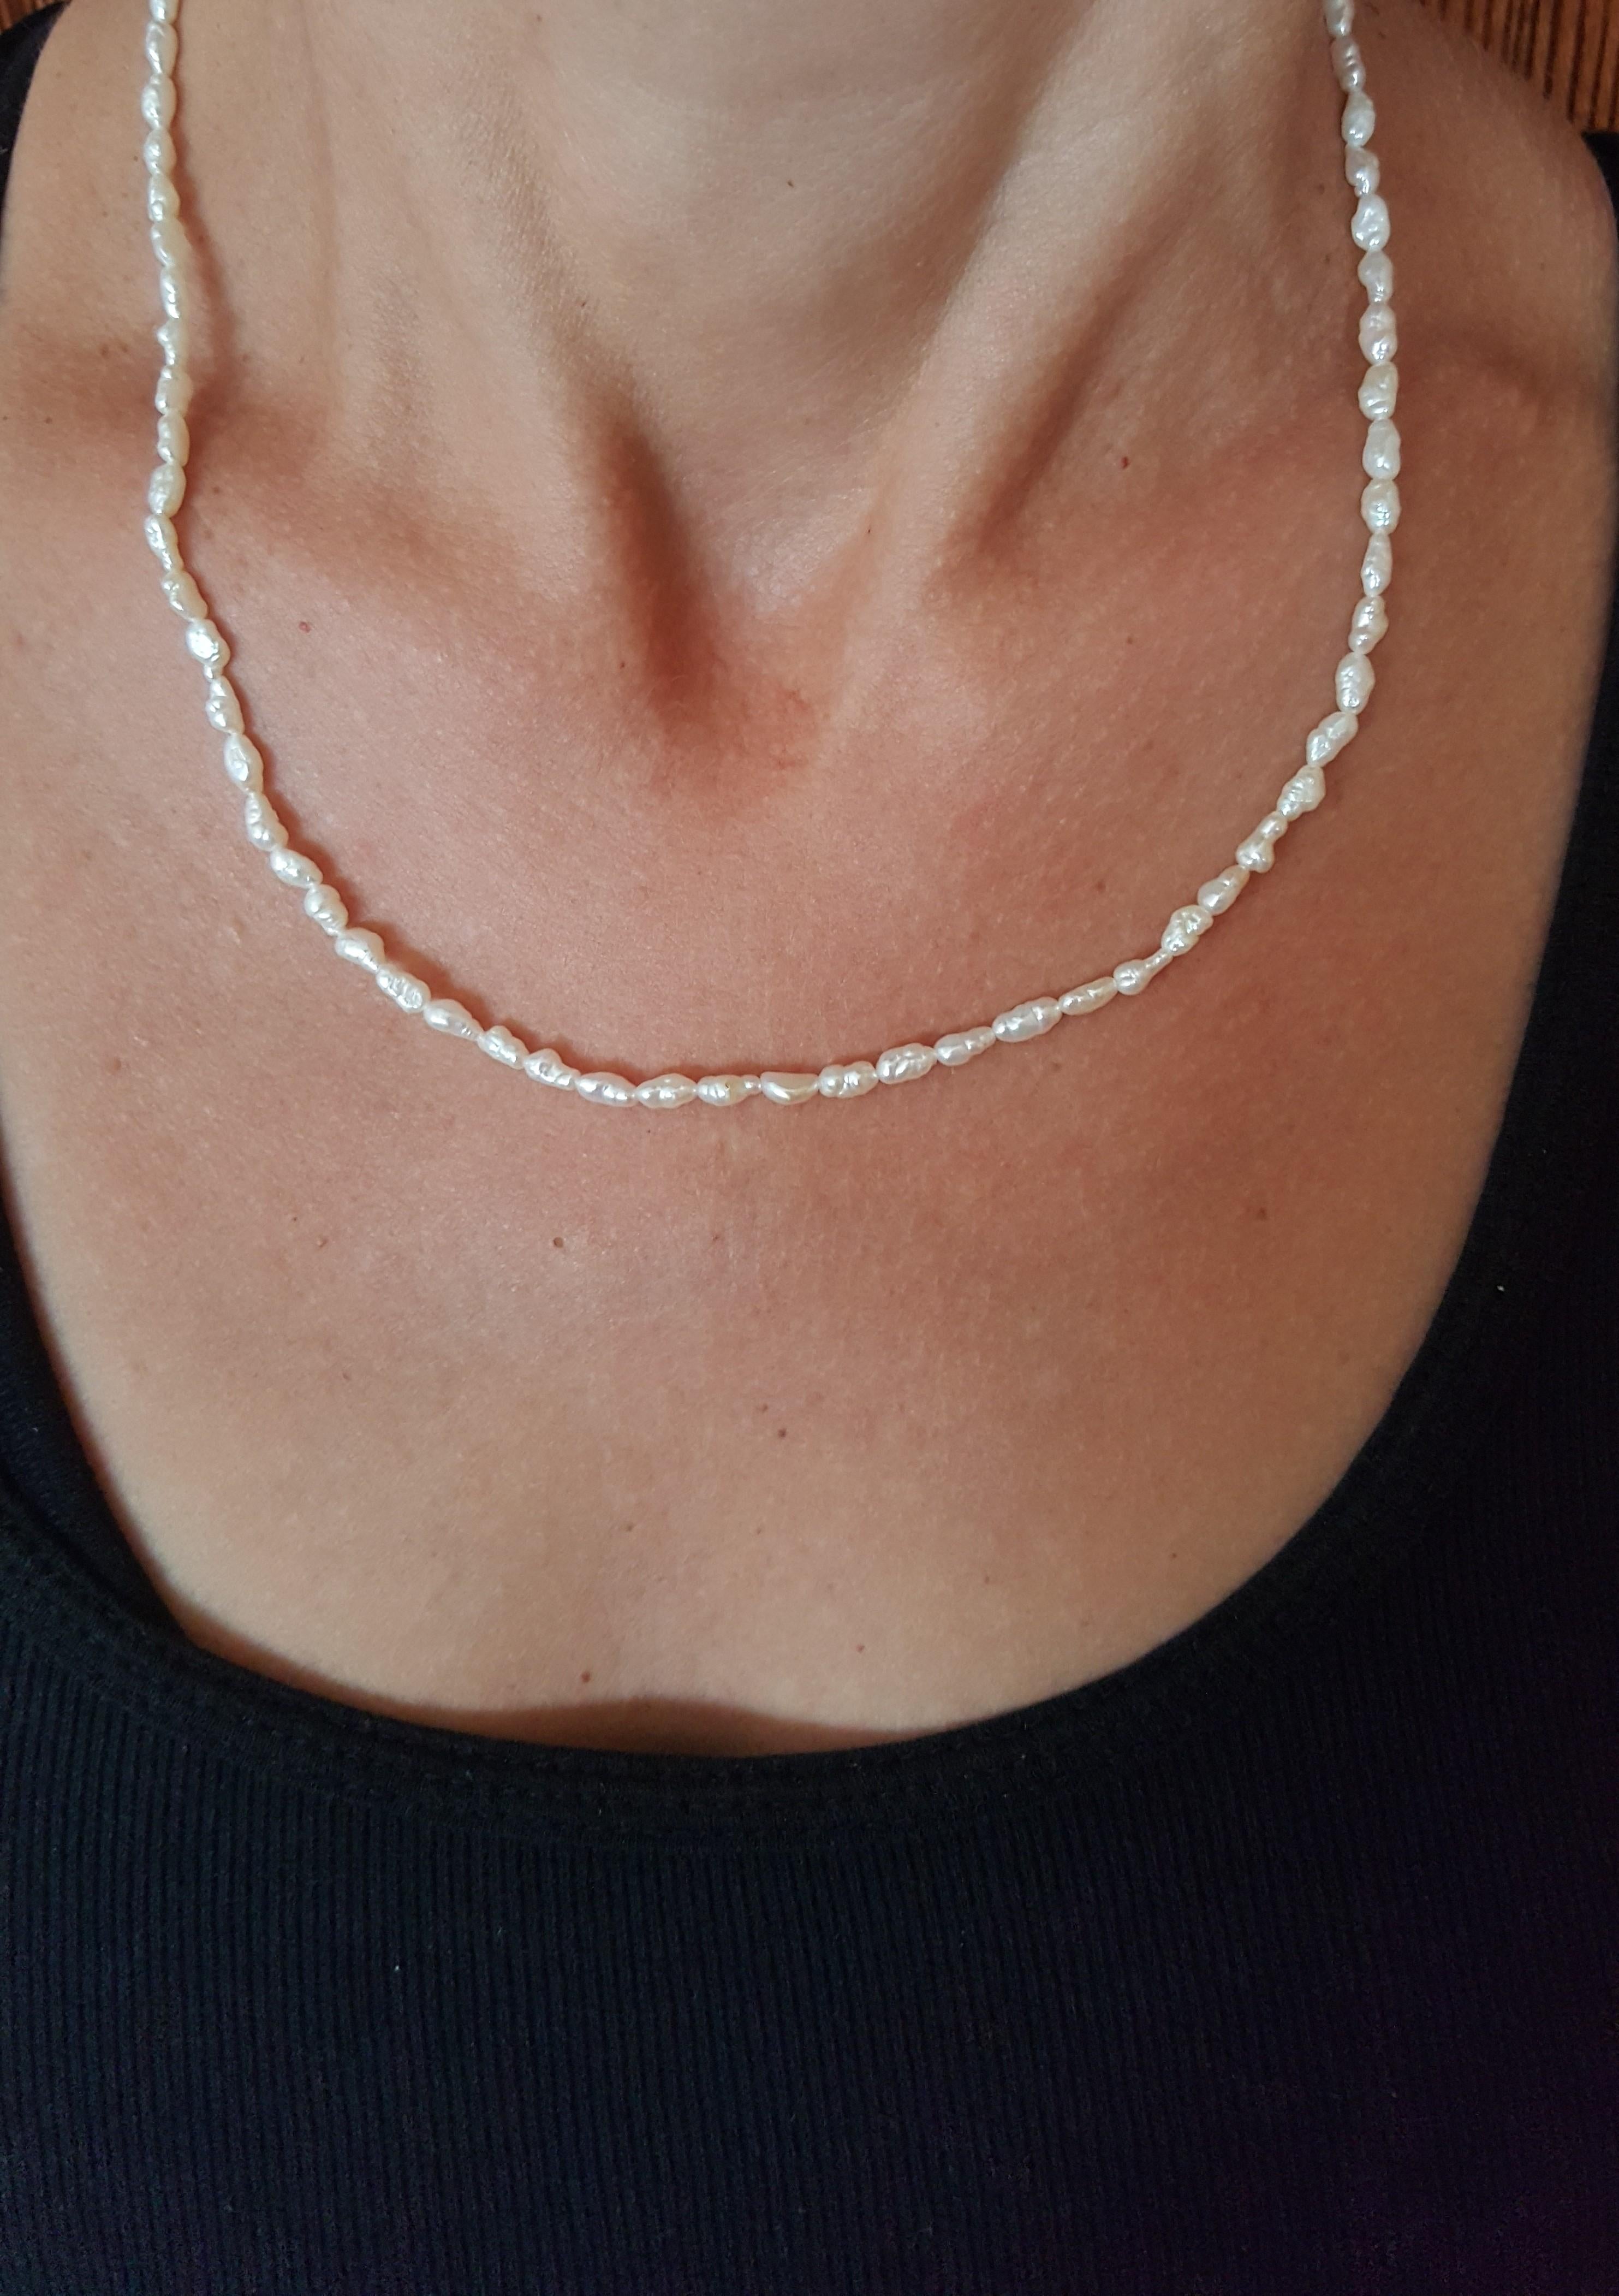 Eighteen-inch white freshwater pearl strand with 14kt yellow gold pearl clasp. The 3mm pearls have lustrous clean nacre. The lovely strand can be worn separately or layered with other necklace strands. Please let us know if you have any